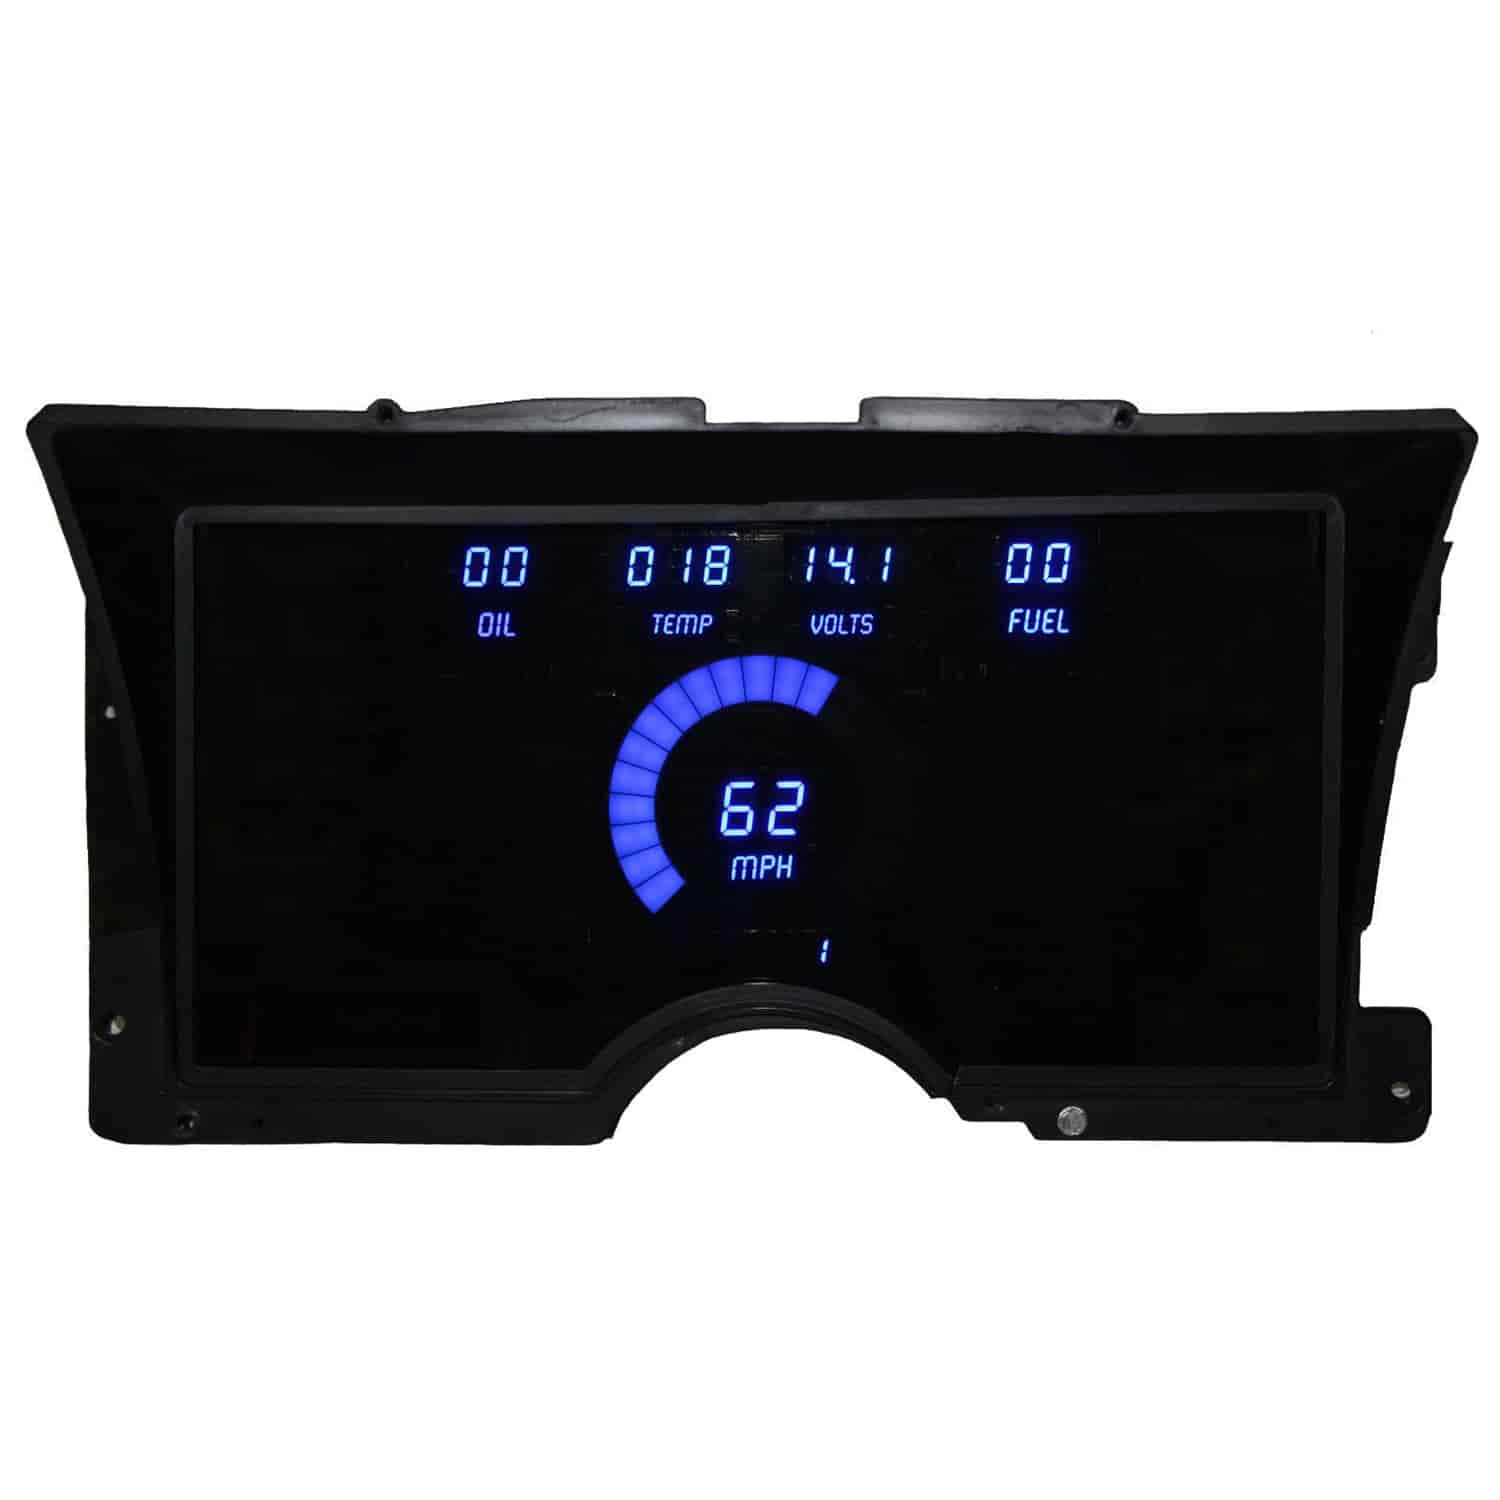 LED Direct Replacement Digital Bargraph Dash Kits for 1992-1994 Chevy Truck [Blue]